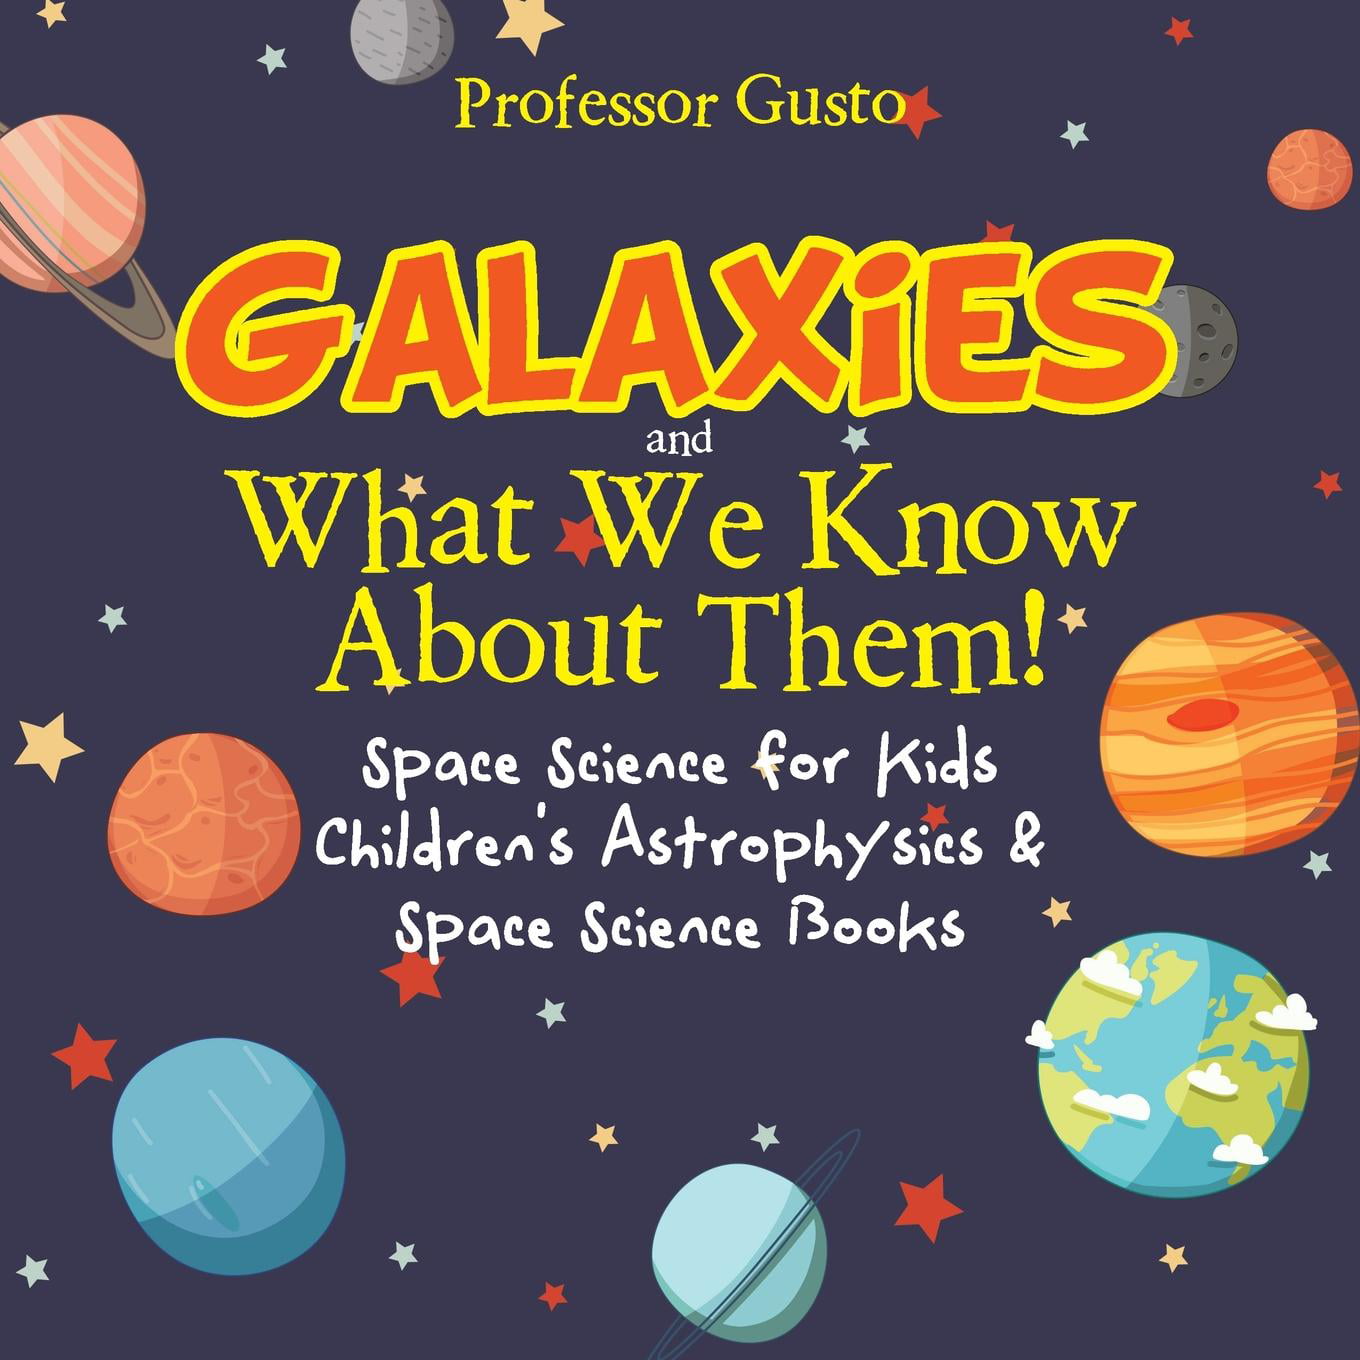 Galaxies and What We Know about Them! Space Science for Kids - Children's Astrophysics & Space